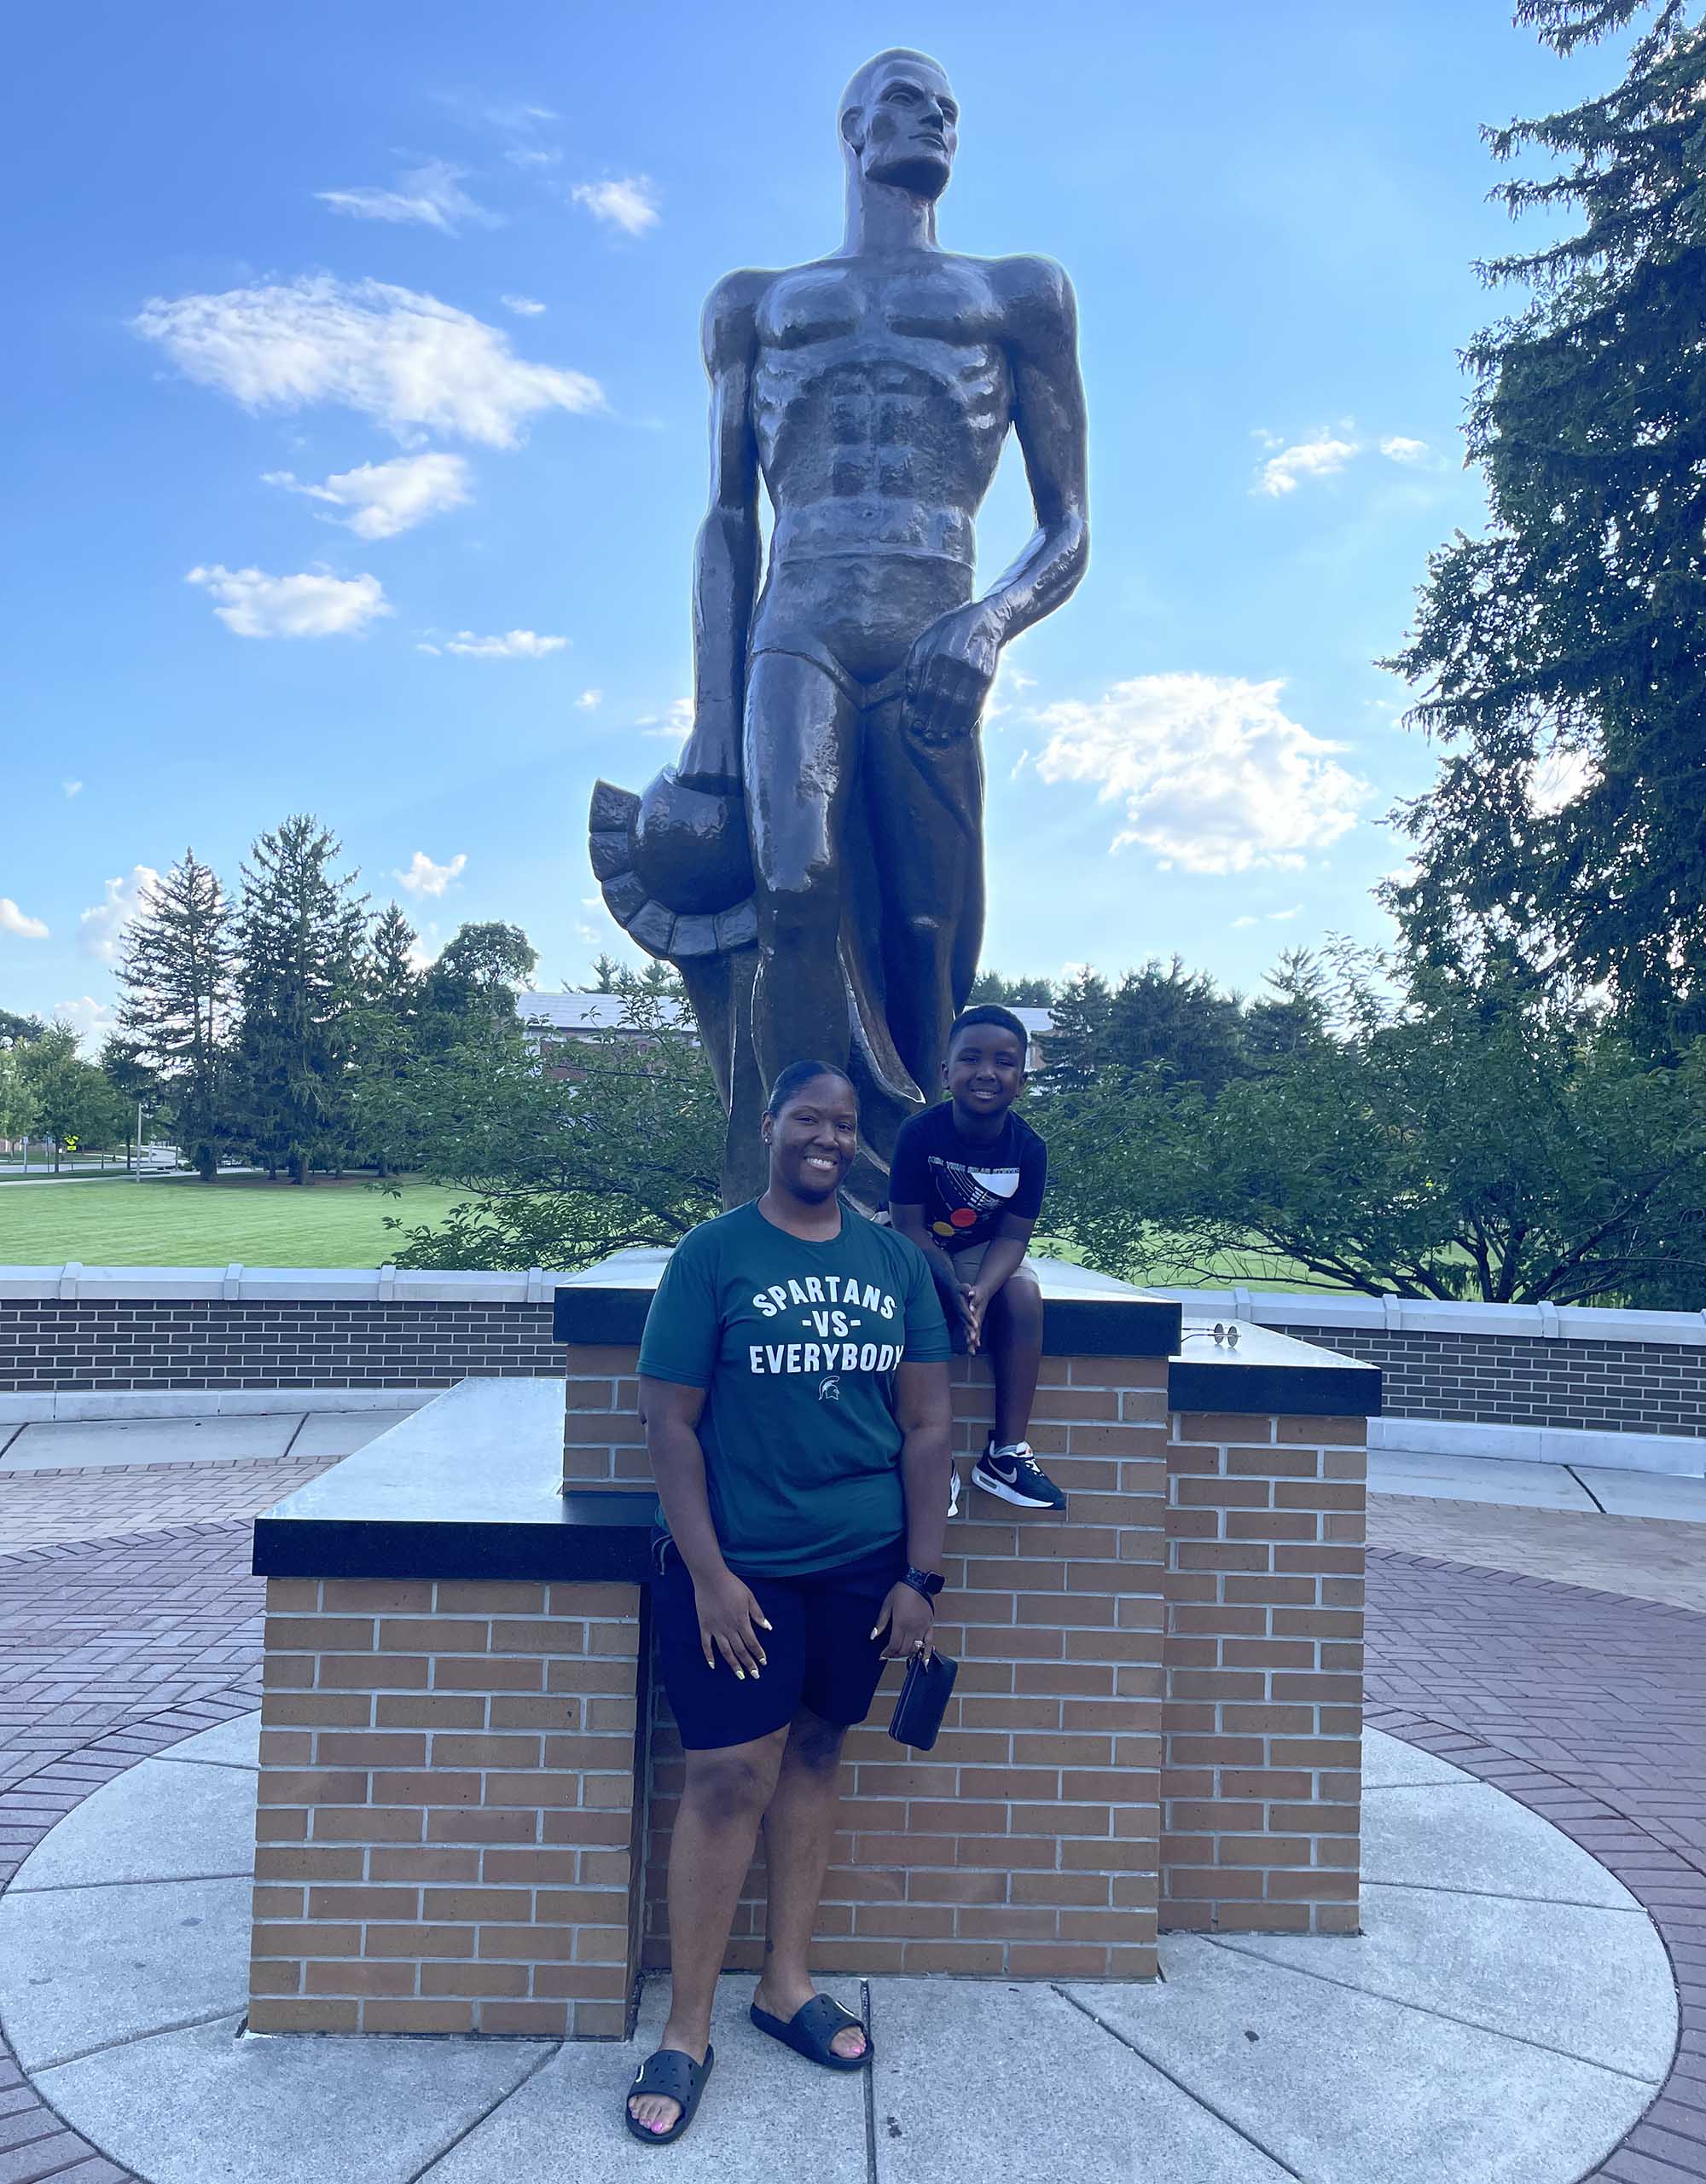 Dequindre Williamson and son in front of Spartan Statue